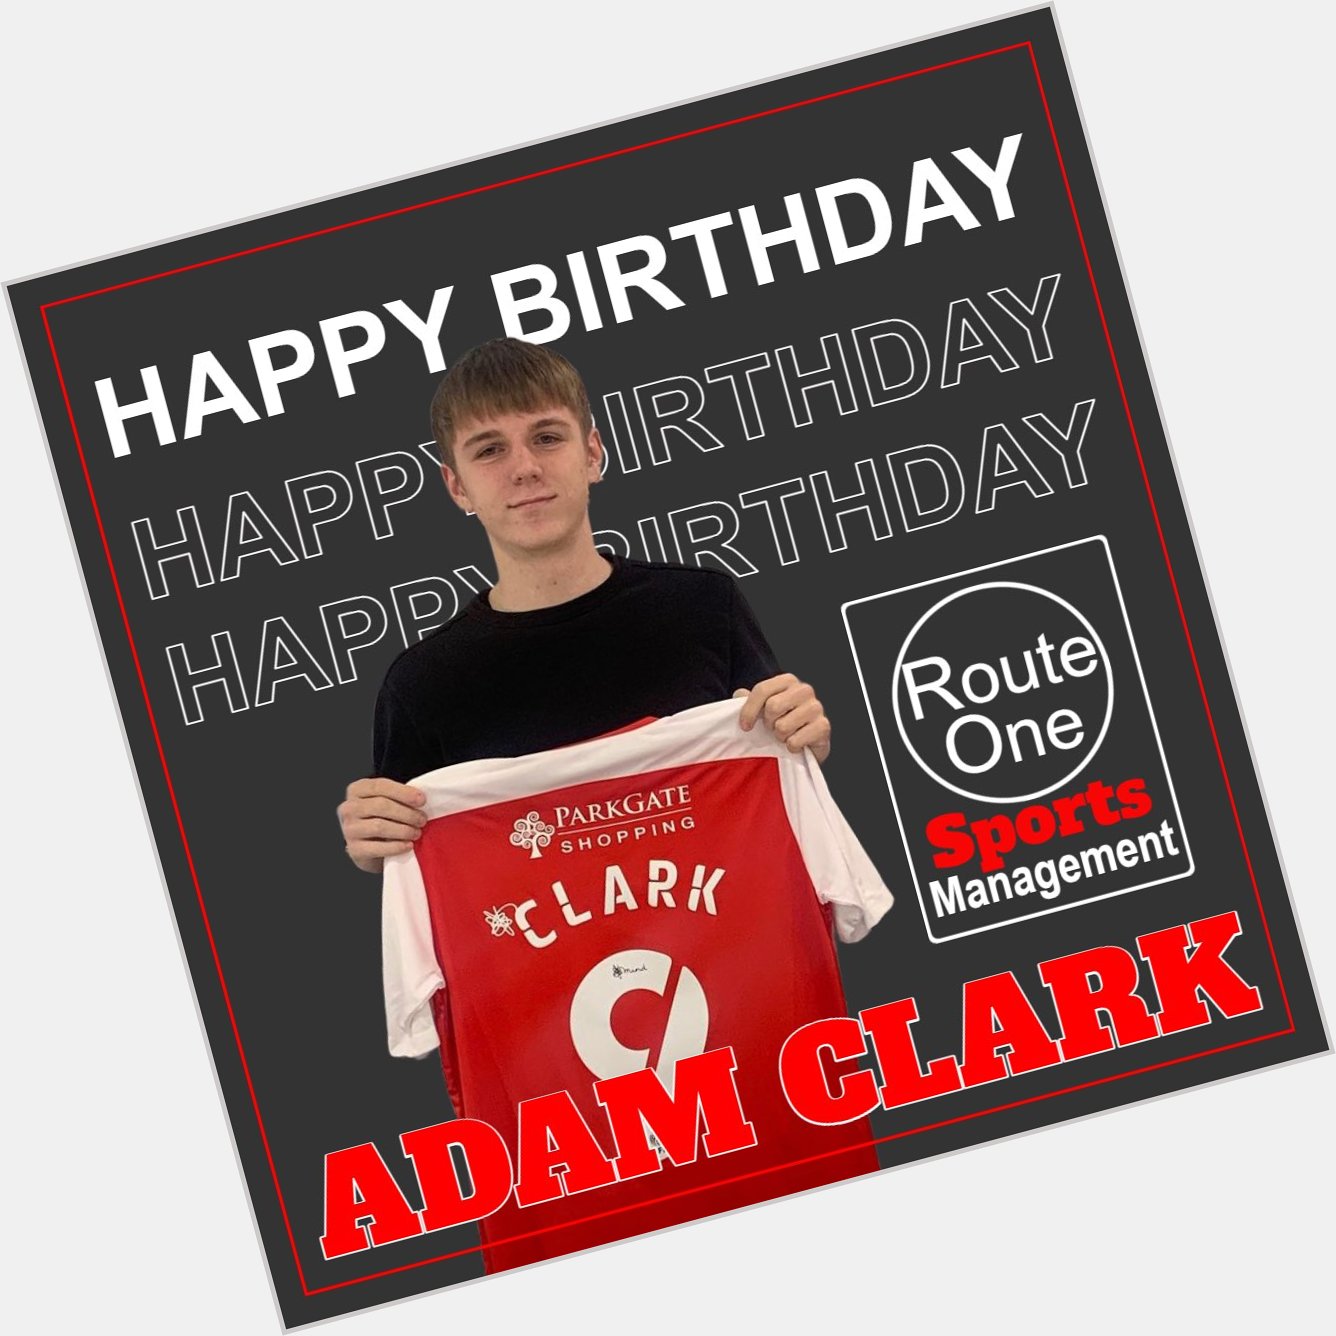 Happy Birthday to our client and  Striker Adam Clark. Have a great day! 